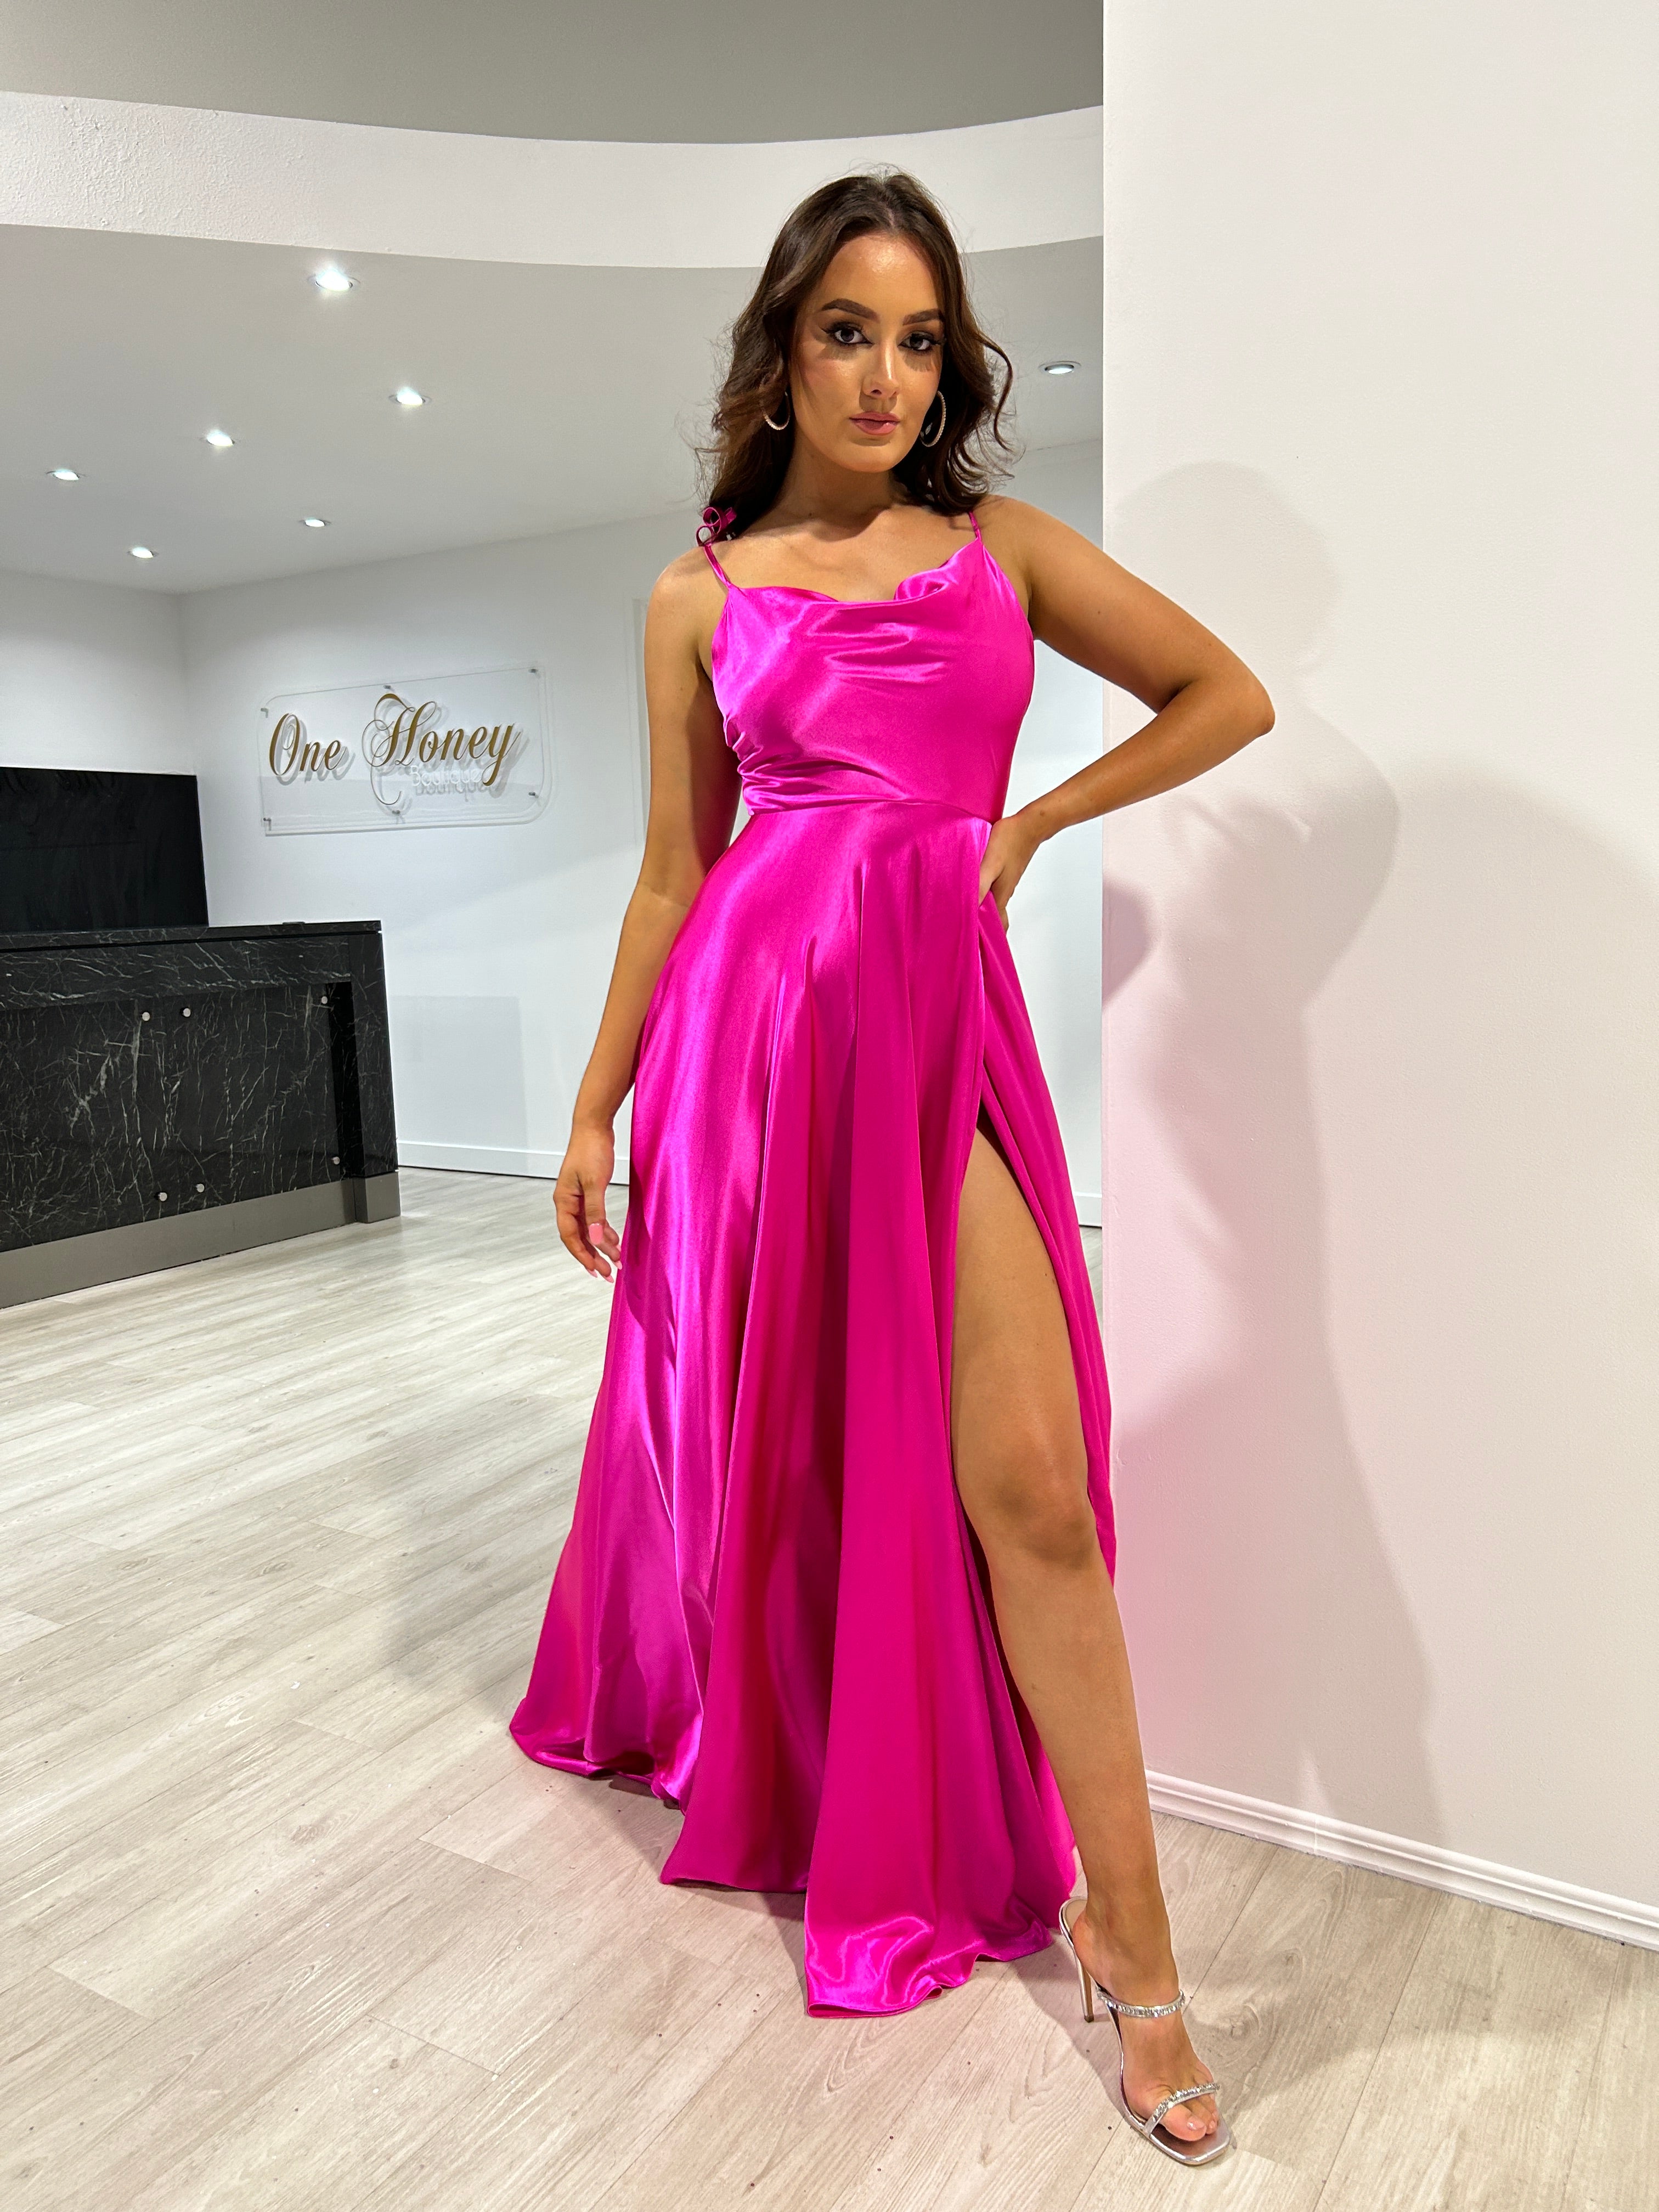 Camille |Barbie Style A Line Hot Pink Short Homecoming Dress